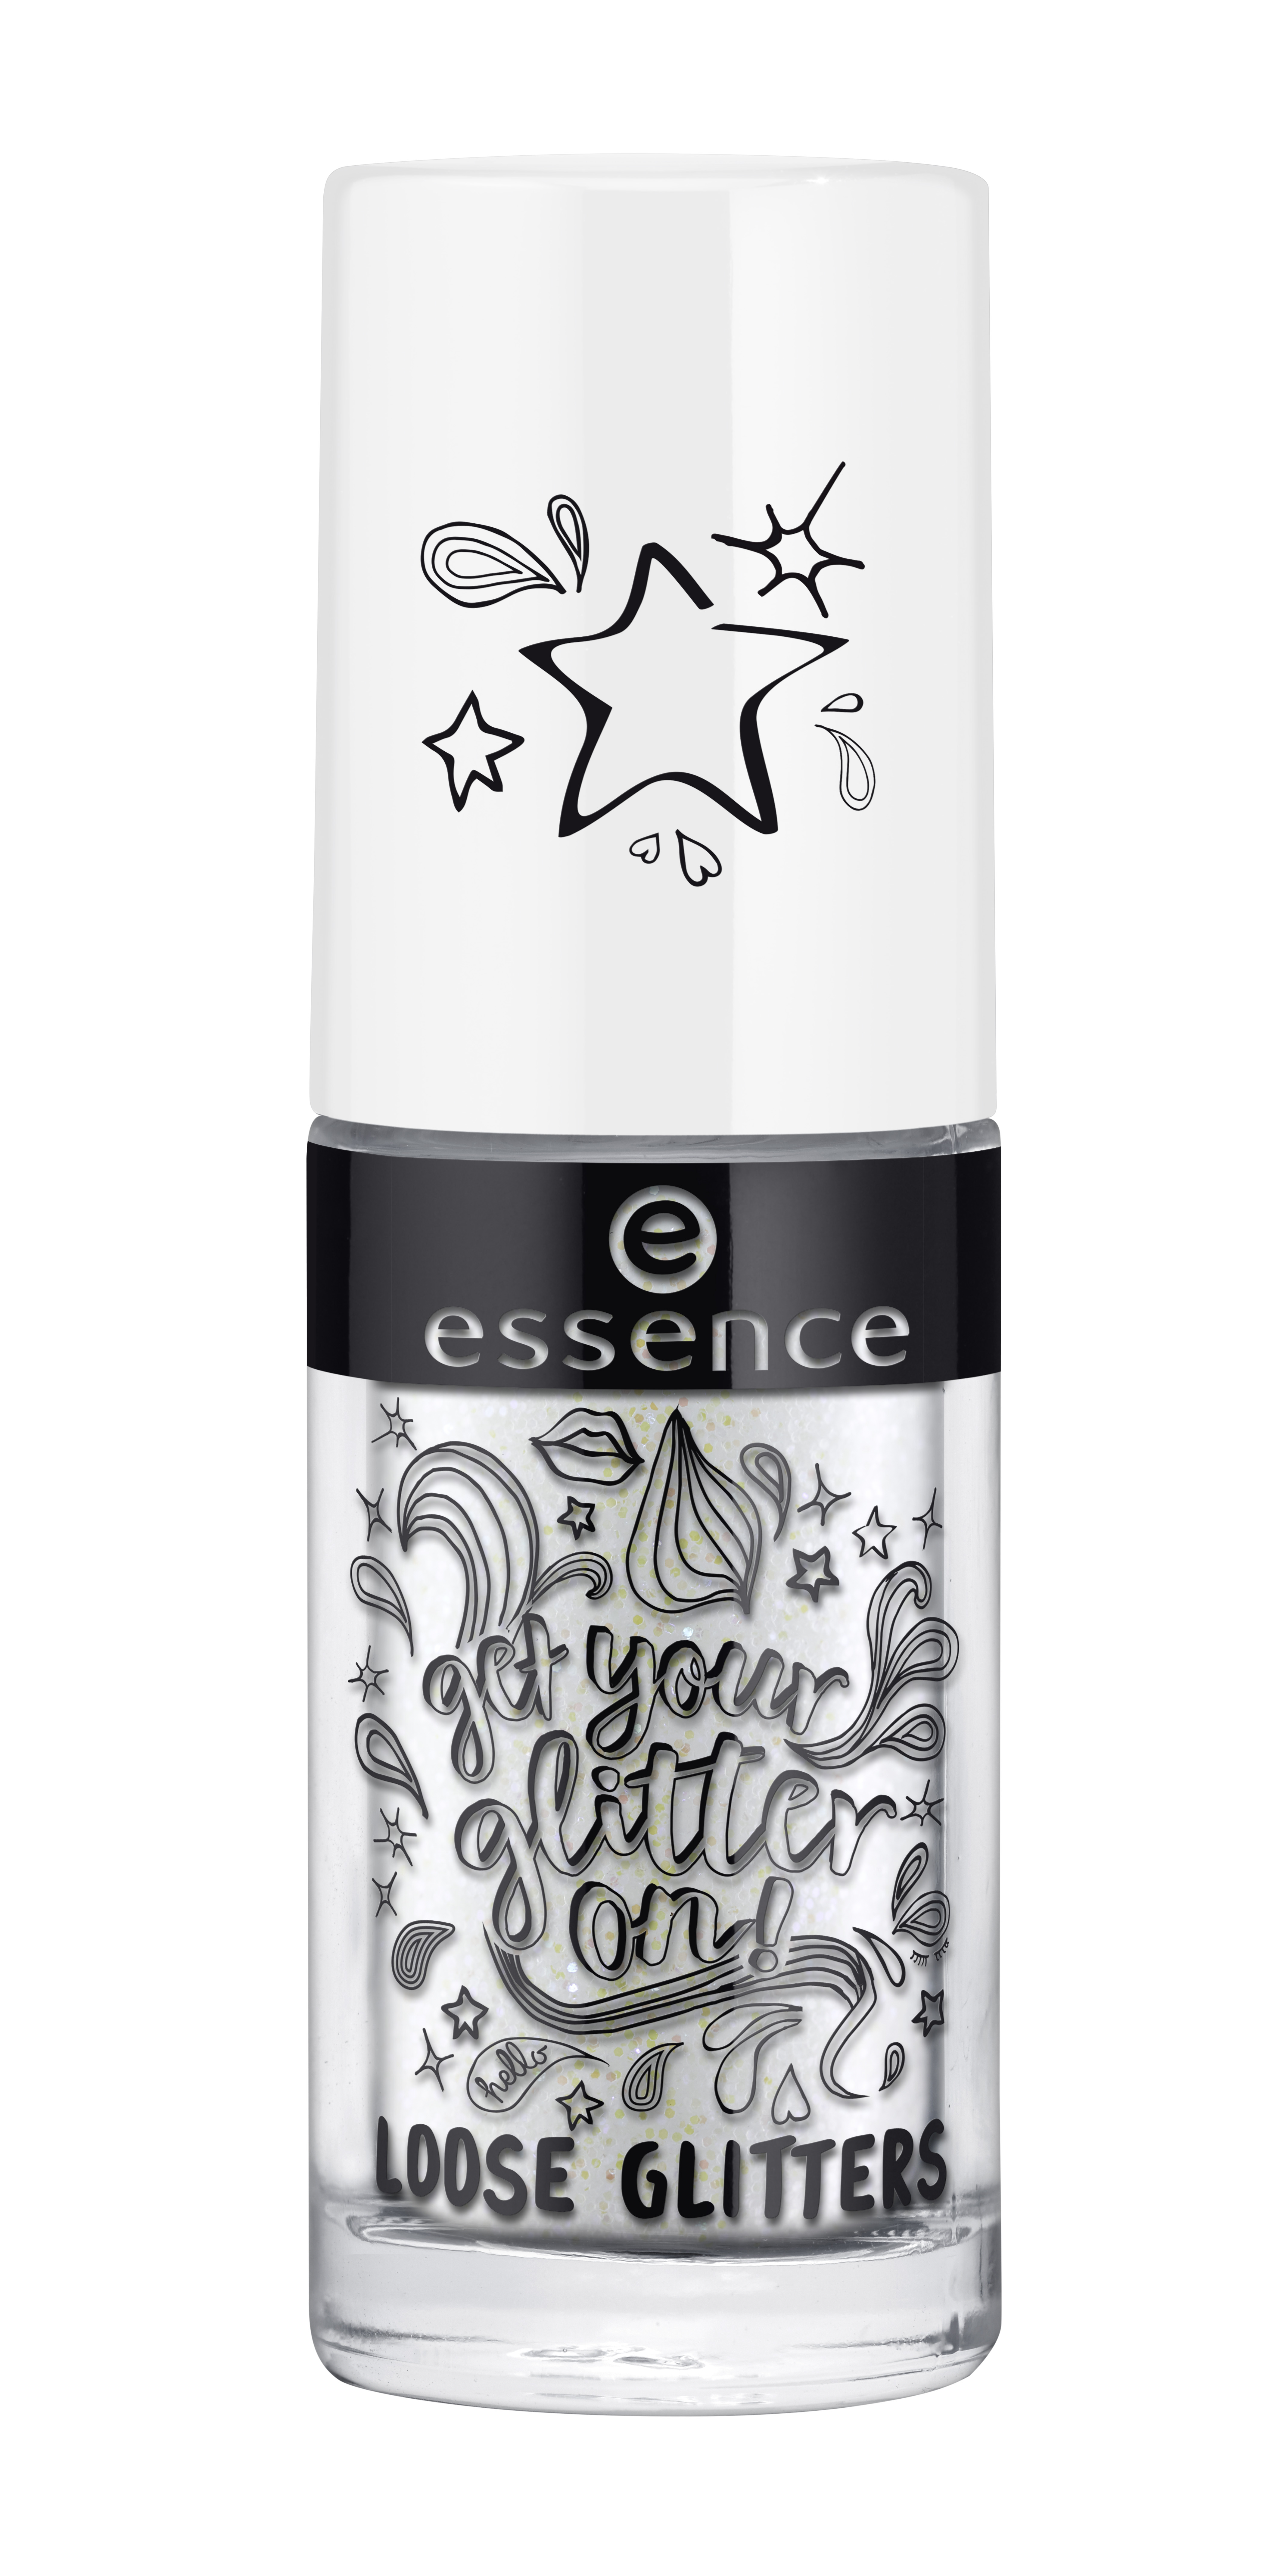 essence get your glitter on! loose glitters 07